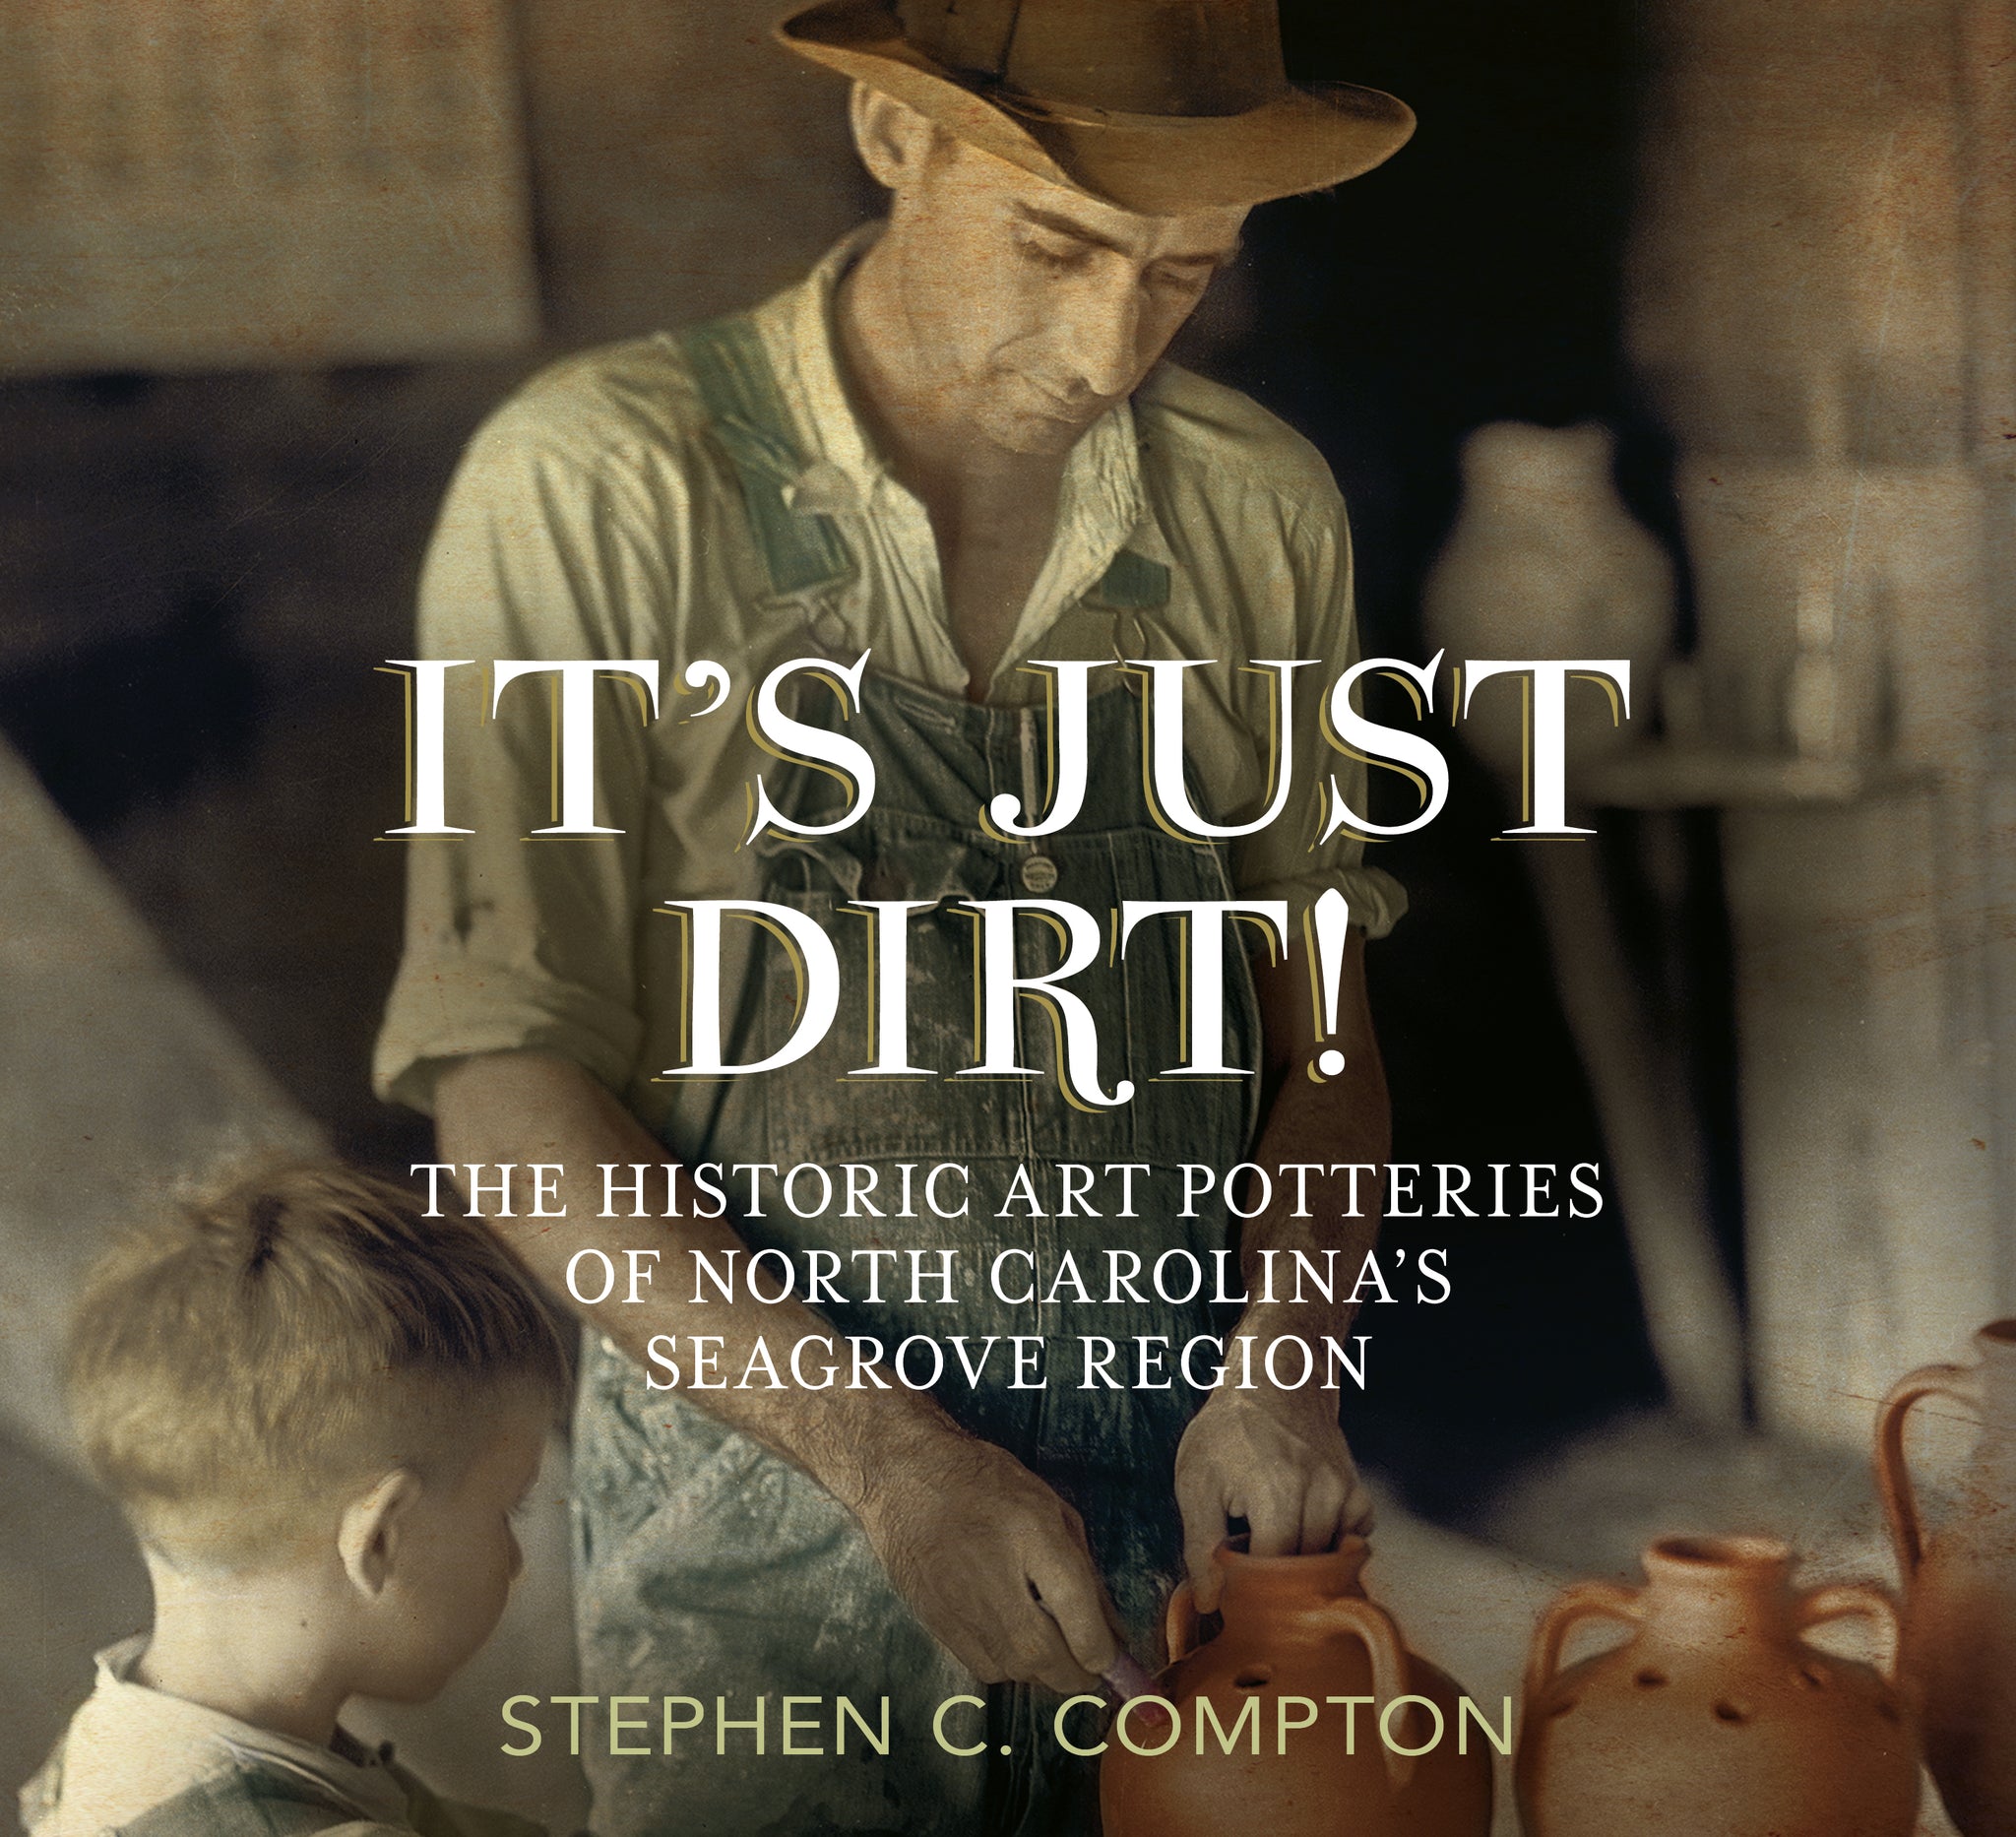 It's Just Dirt: The Historic Art Potteries of North Carolona's Seagrove Region (paperback)